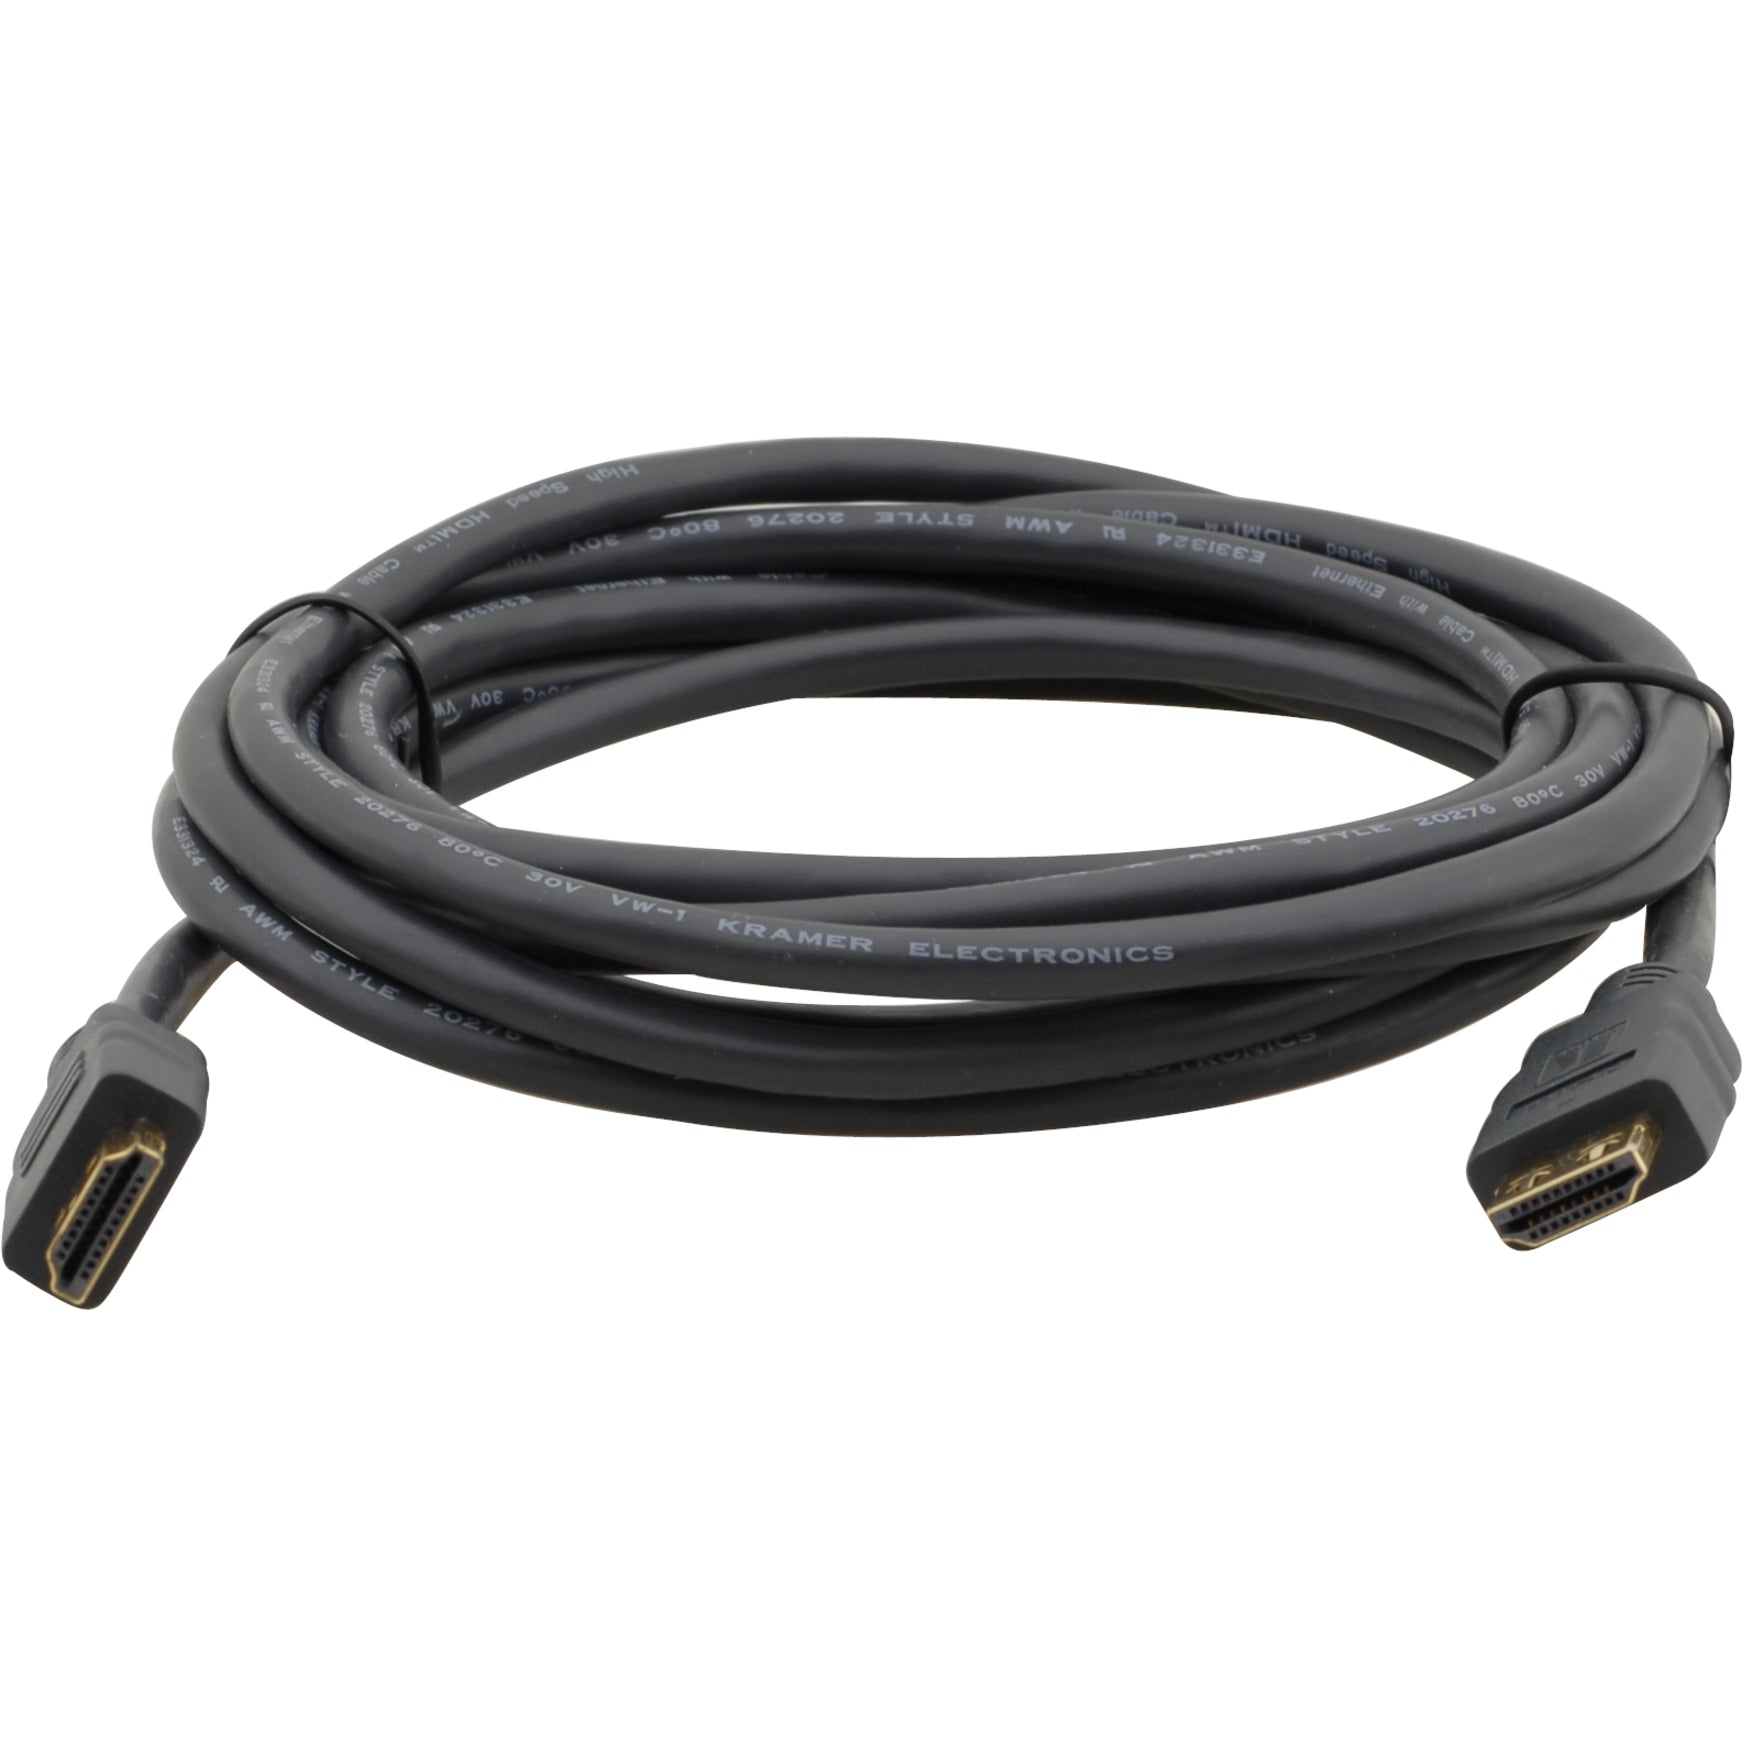 Kramer C-MHM/MHM-25 Flexible High-Speed HDMI Cable with Ethernet